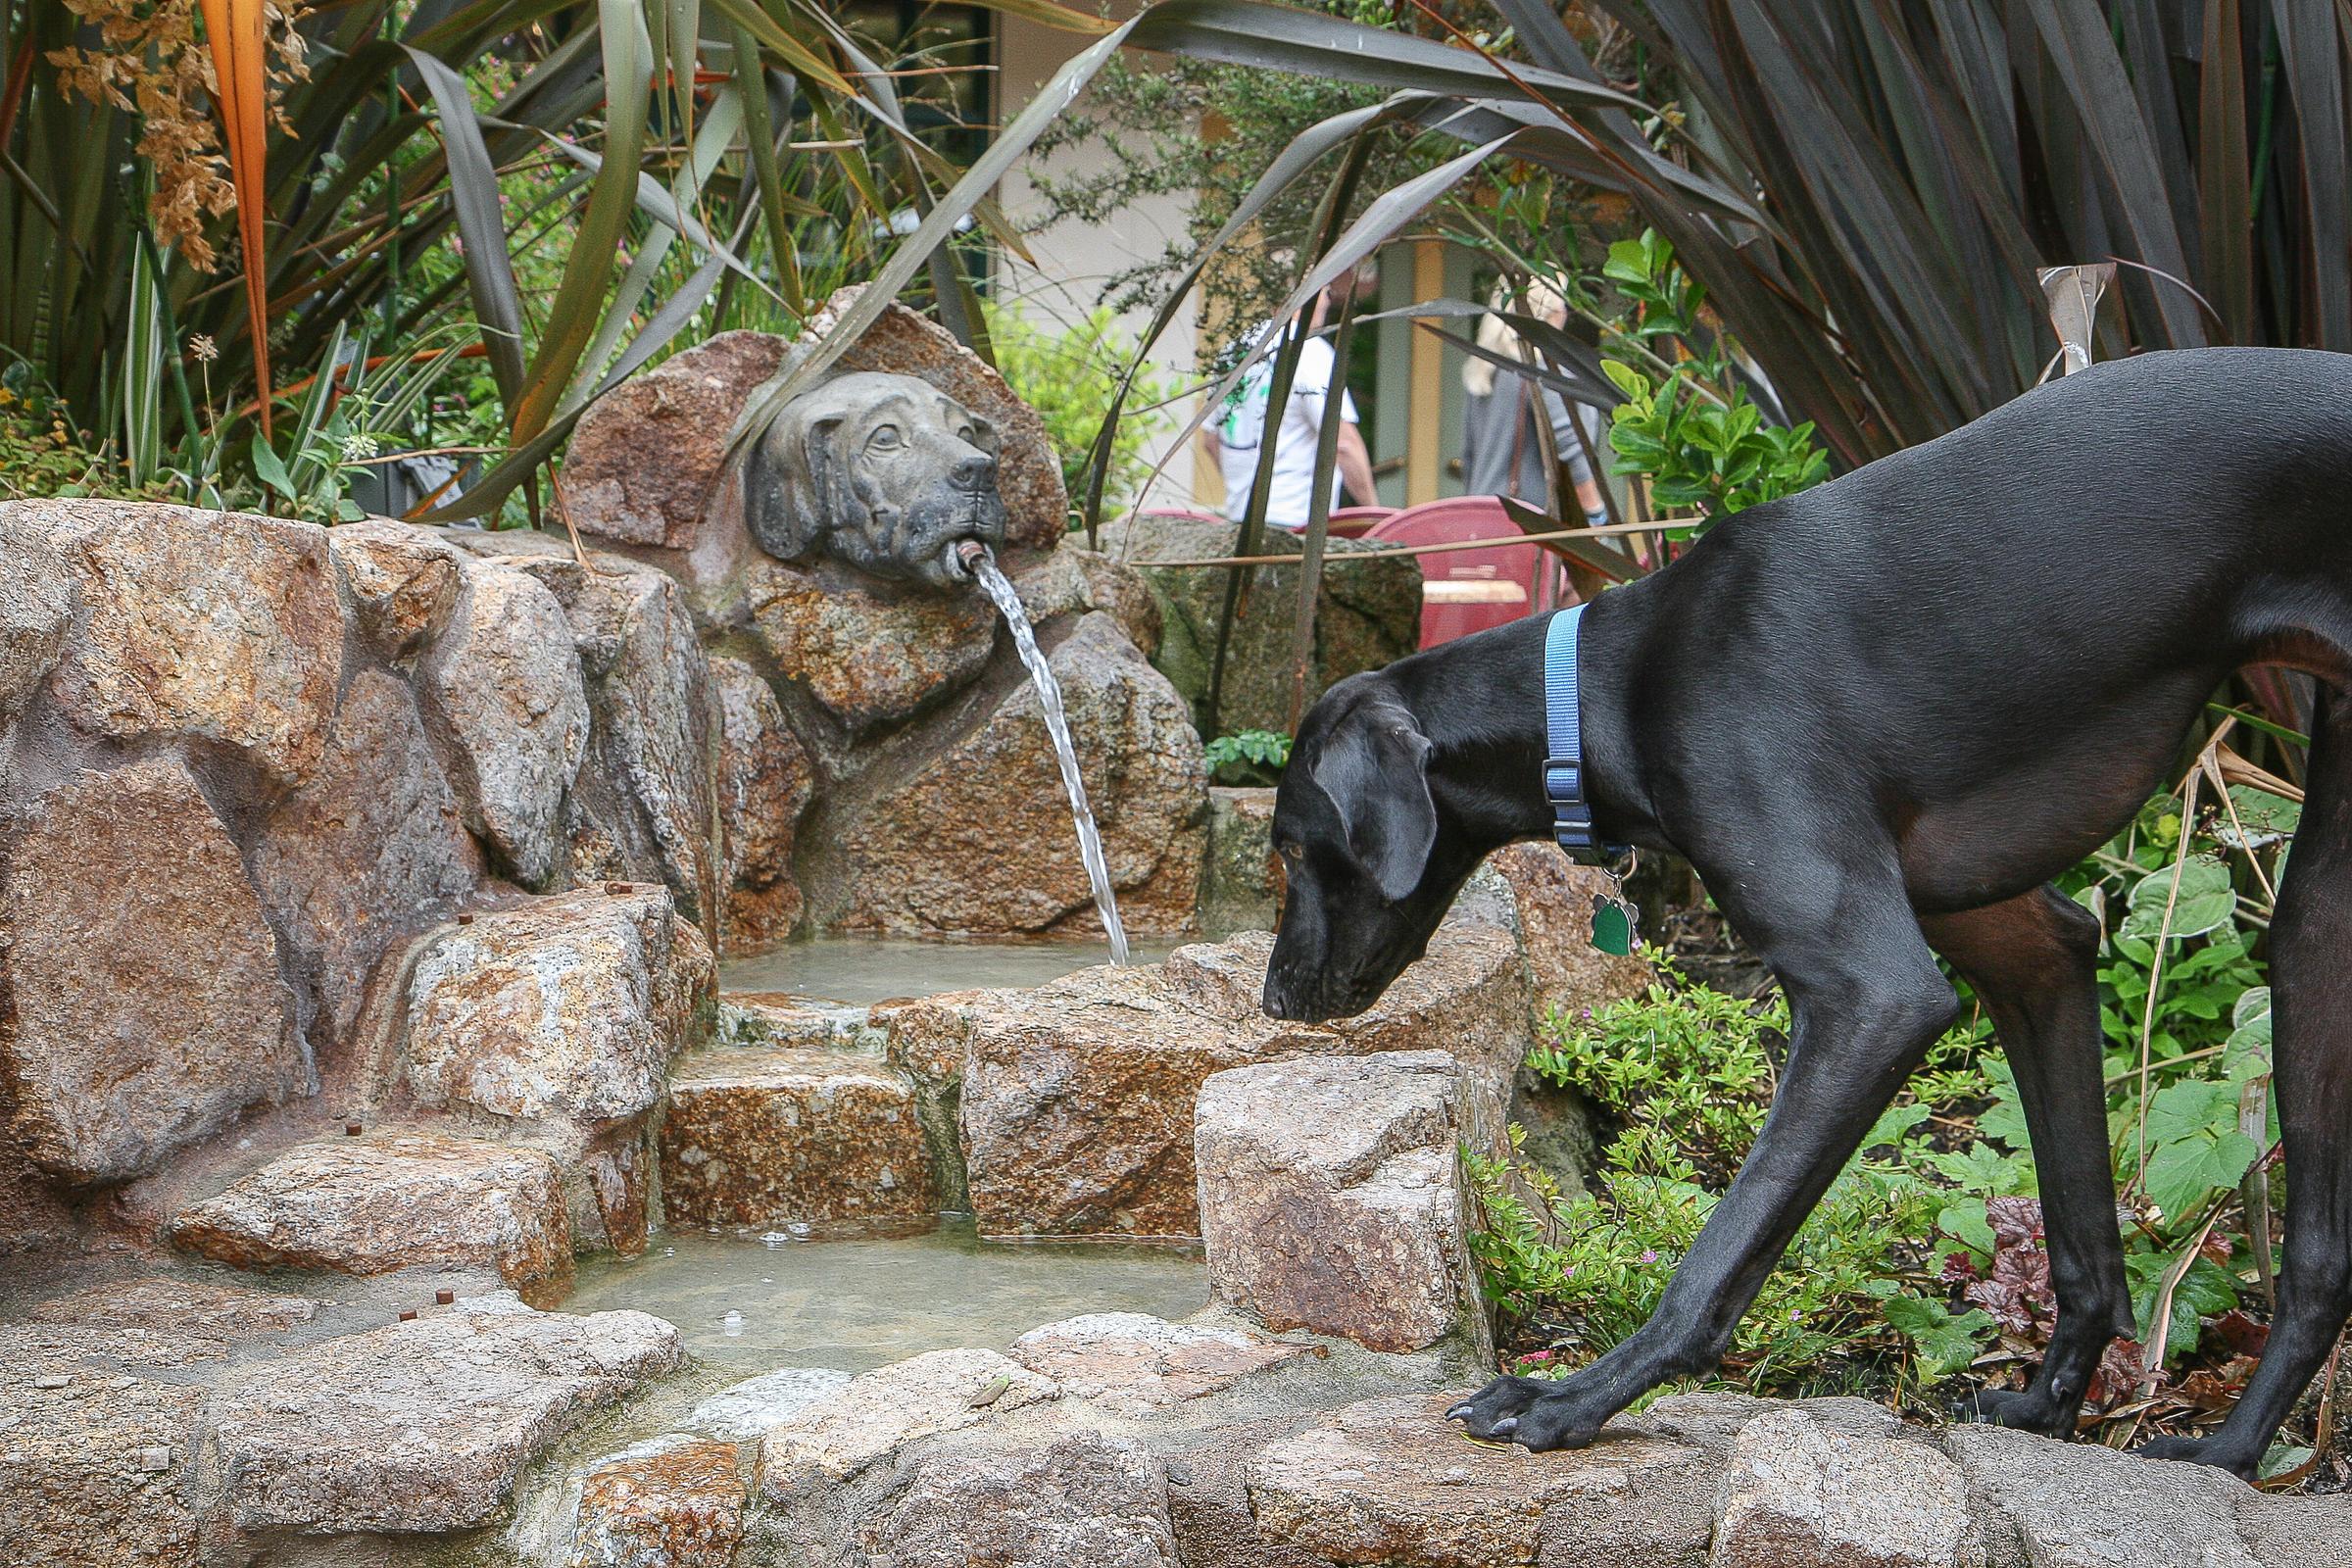 Pet Friendly Carmel Plaza and Fountain of Woof